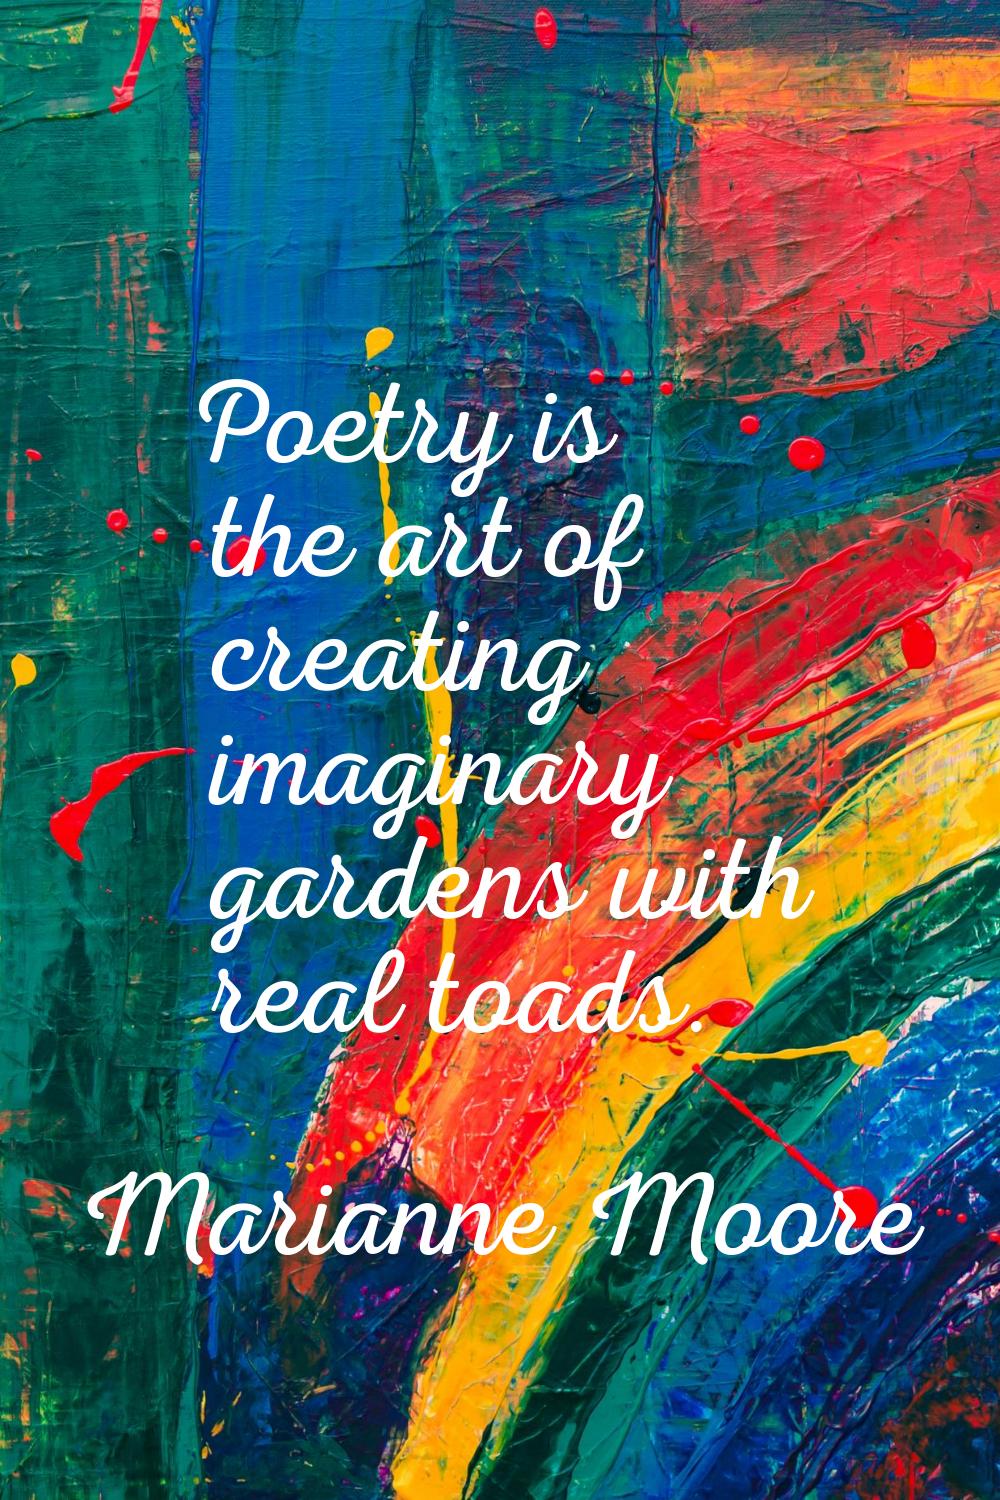 Poetry is the art of creating imaginary gardens with real toads.